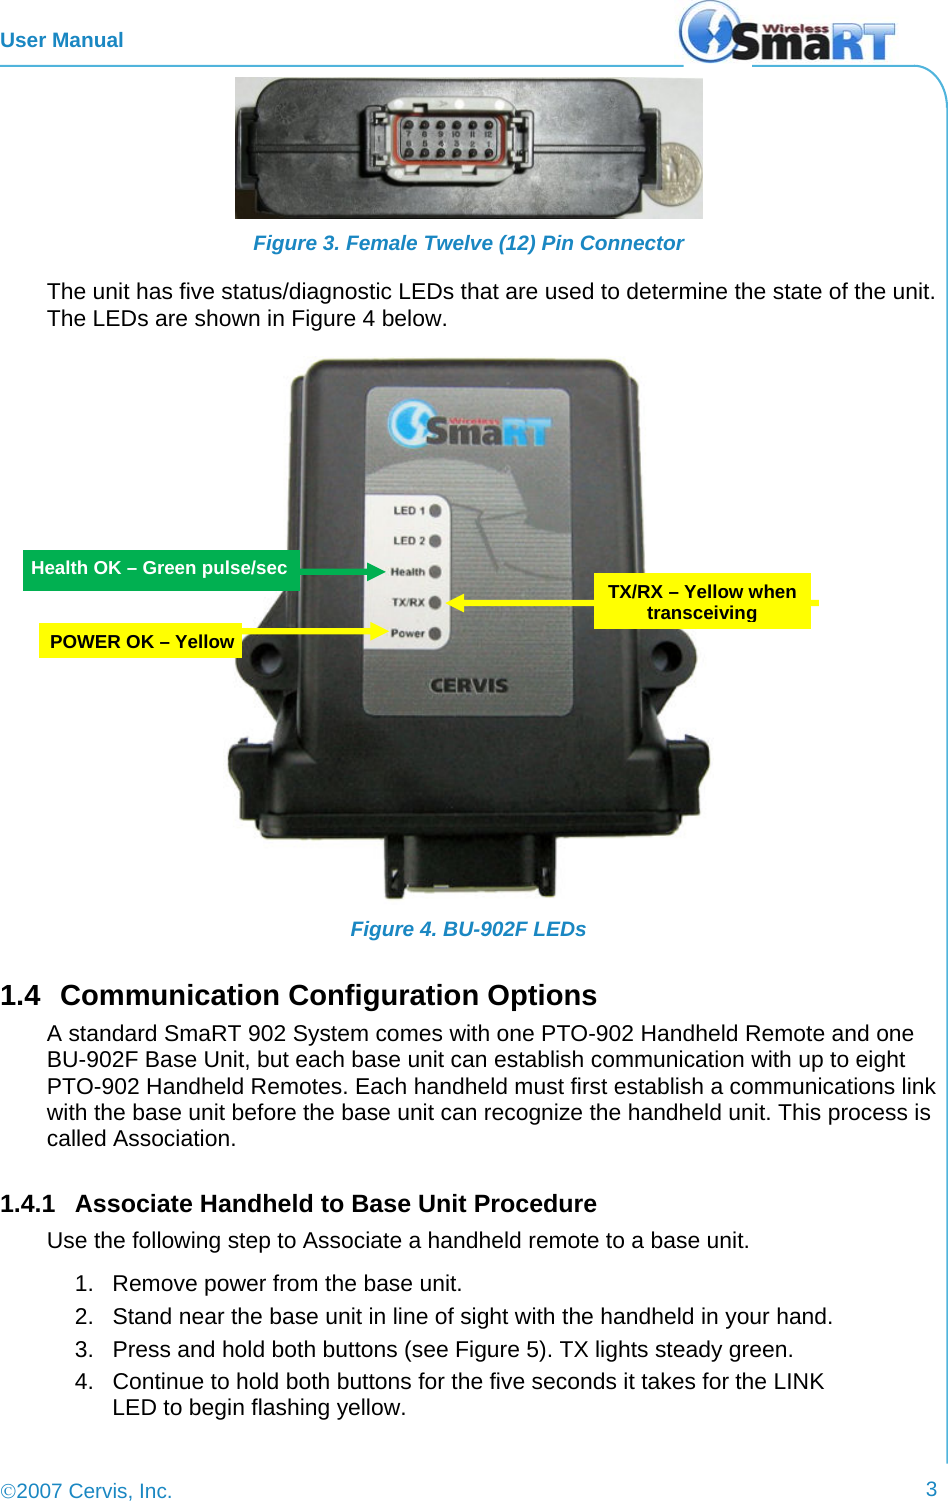 User Manual ©2007 Cervis, Inc.      3 Figure 3. Female Twelve (12) Pin Connector The unit has five status/diagnostic LEDs that are used to determine the state of the unit. The LEDs are shown in Figure 4 below.  Figure 4. BU-902F LEDs 1.4  Communication Configuration Options A standard SmaRT 902 System comes with one PTO-902 Handheld Remote and one BU-902F Base Unit, but each base unit can establish communication with up to eight PTO-902 Handheld Remotes. Each handheld must first establish a communications link with the base unit before the base unit can recognize the handheld unit. This process is called Association.  1.4.1  Associate Handheld to Base Unit Procedure Use the following step to Associate a handheld remote to a base unit. 1.  Remove power from the base unit. 2.  Stand near the base unit in line of sight with the handheld in your hand. 3.  Press and hold both buttons (see Figure 5). TX lights steady green.  4.  Continue to hold both buttons for the five seconds it takes for the LINK LED to begin flashing yellow. TX/RX – Yellow when transceiving POWER OK – Yellow Health OK – Green pulse/sec